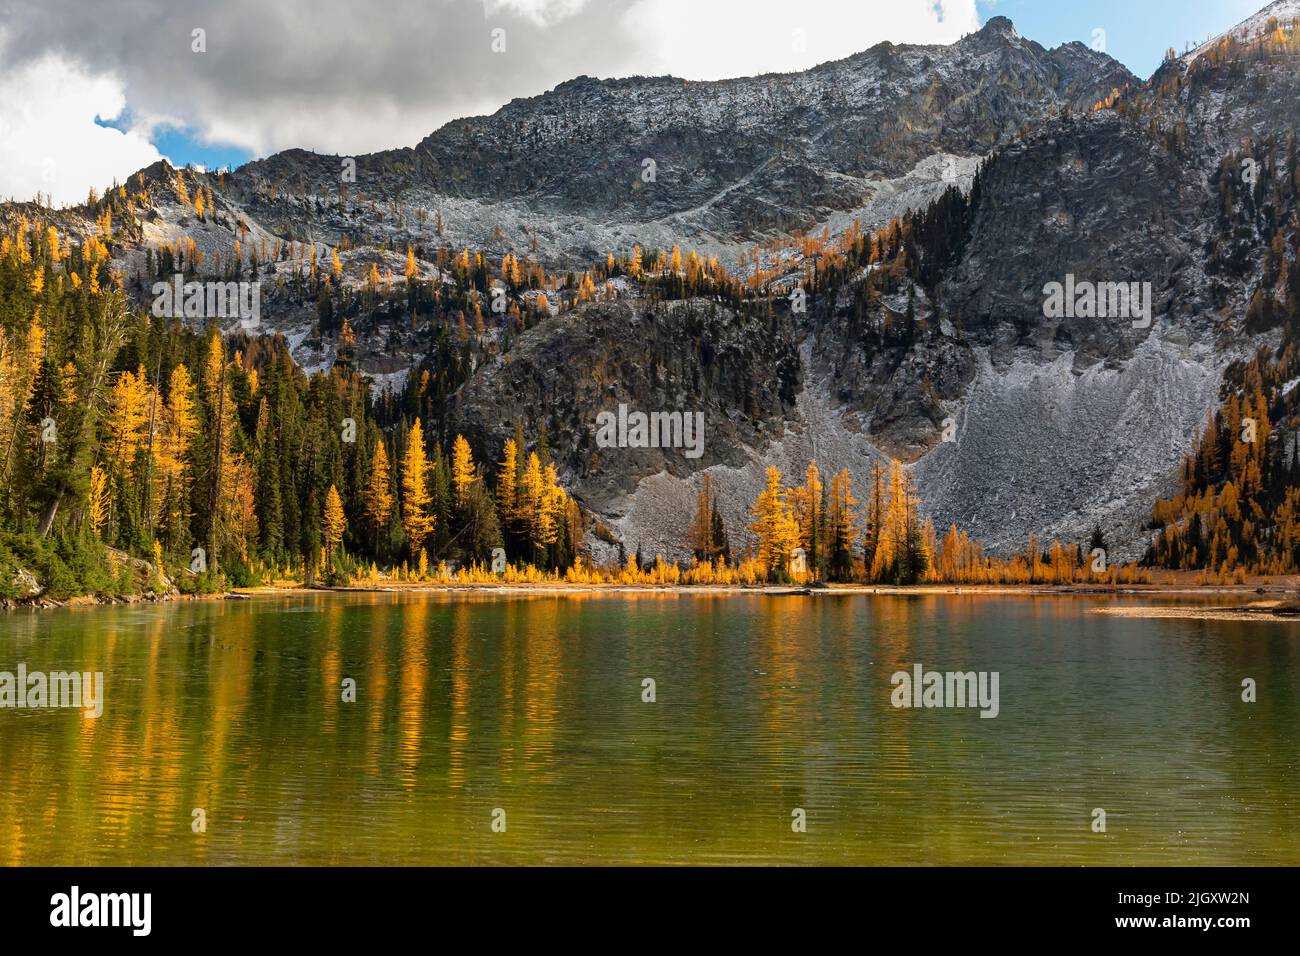 WA21738-00...WASHINGTON - Fall time at Larch Lake below Fifth of July Mountain in the Entiat Mountains of Glacier Peak Wilderness Area. Stock Photo